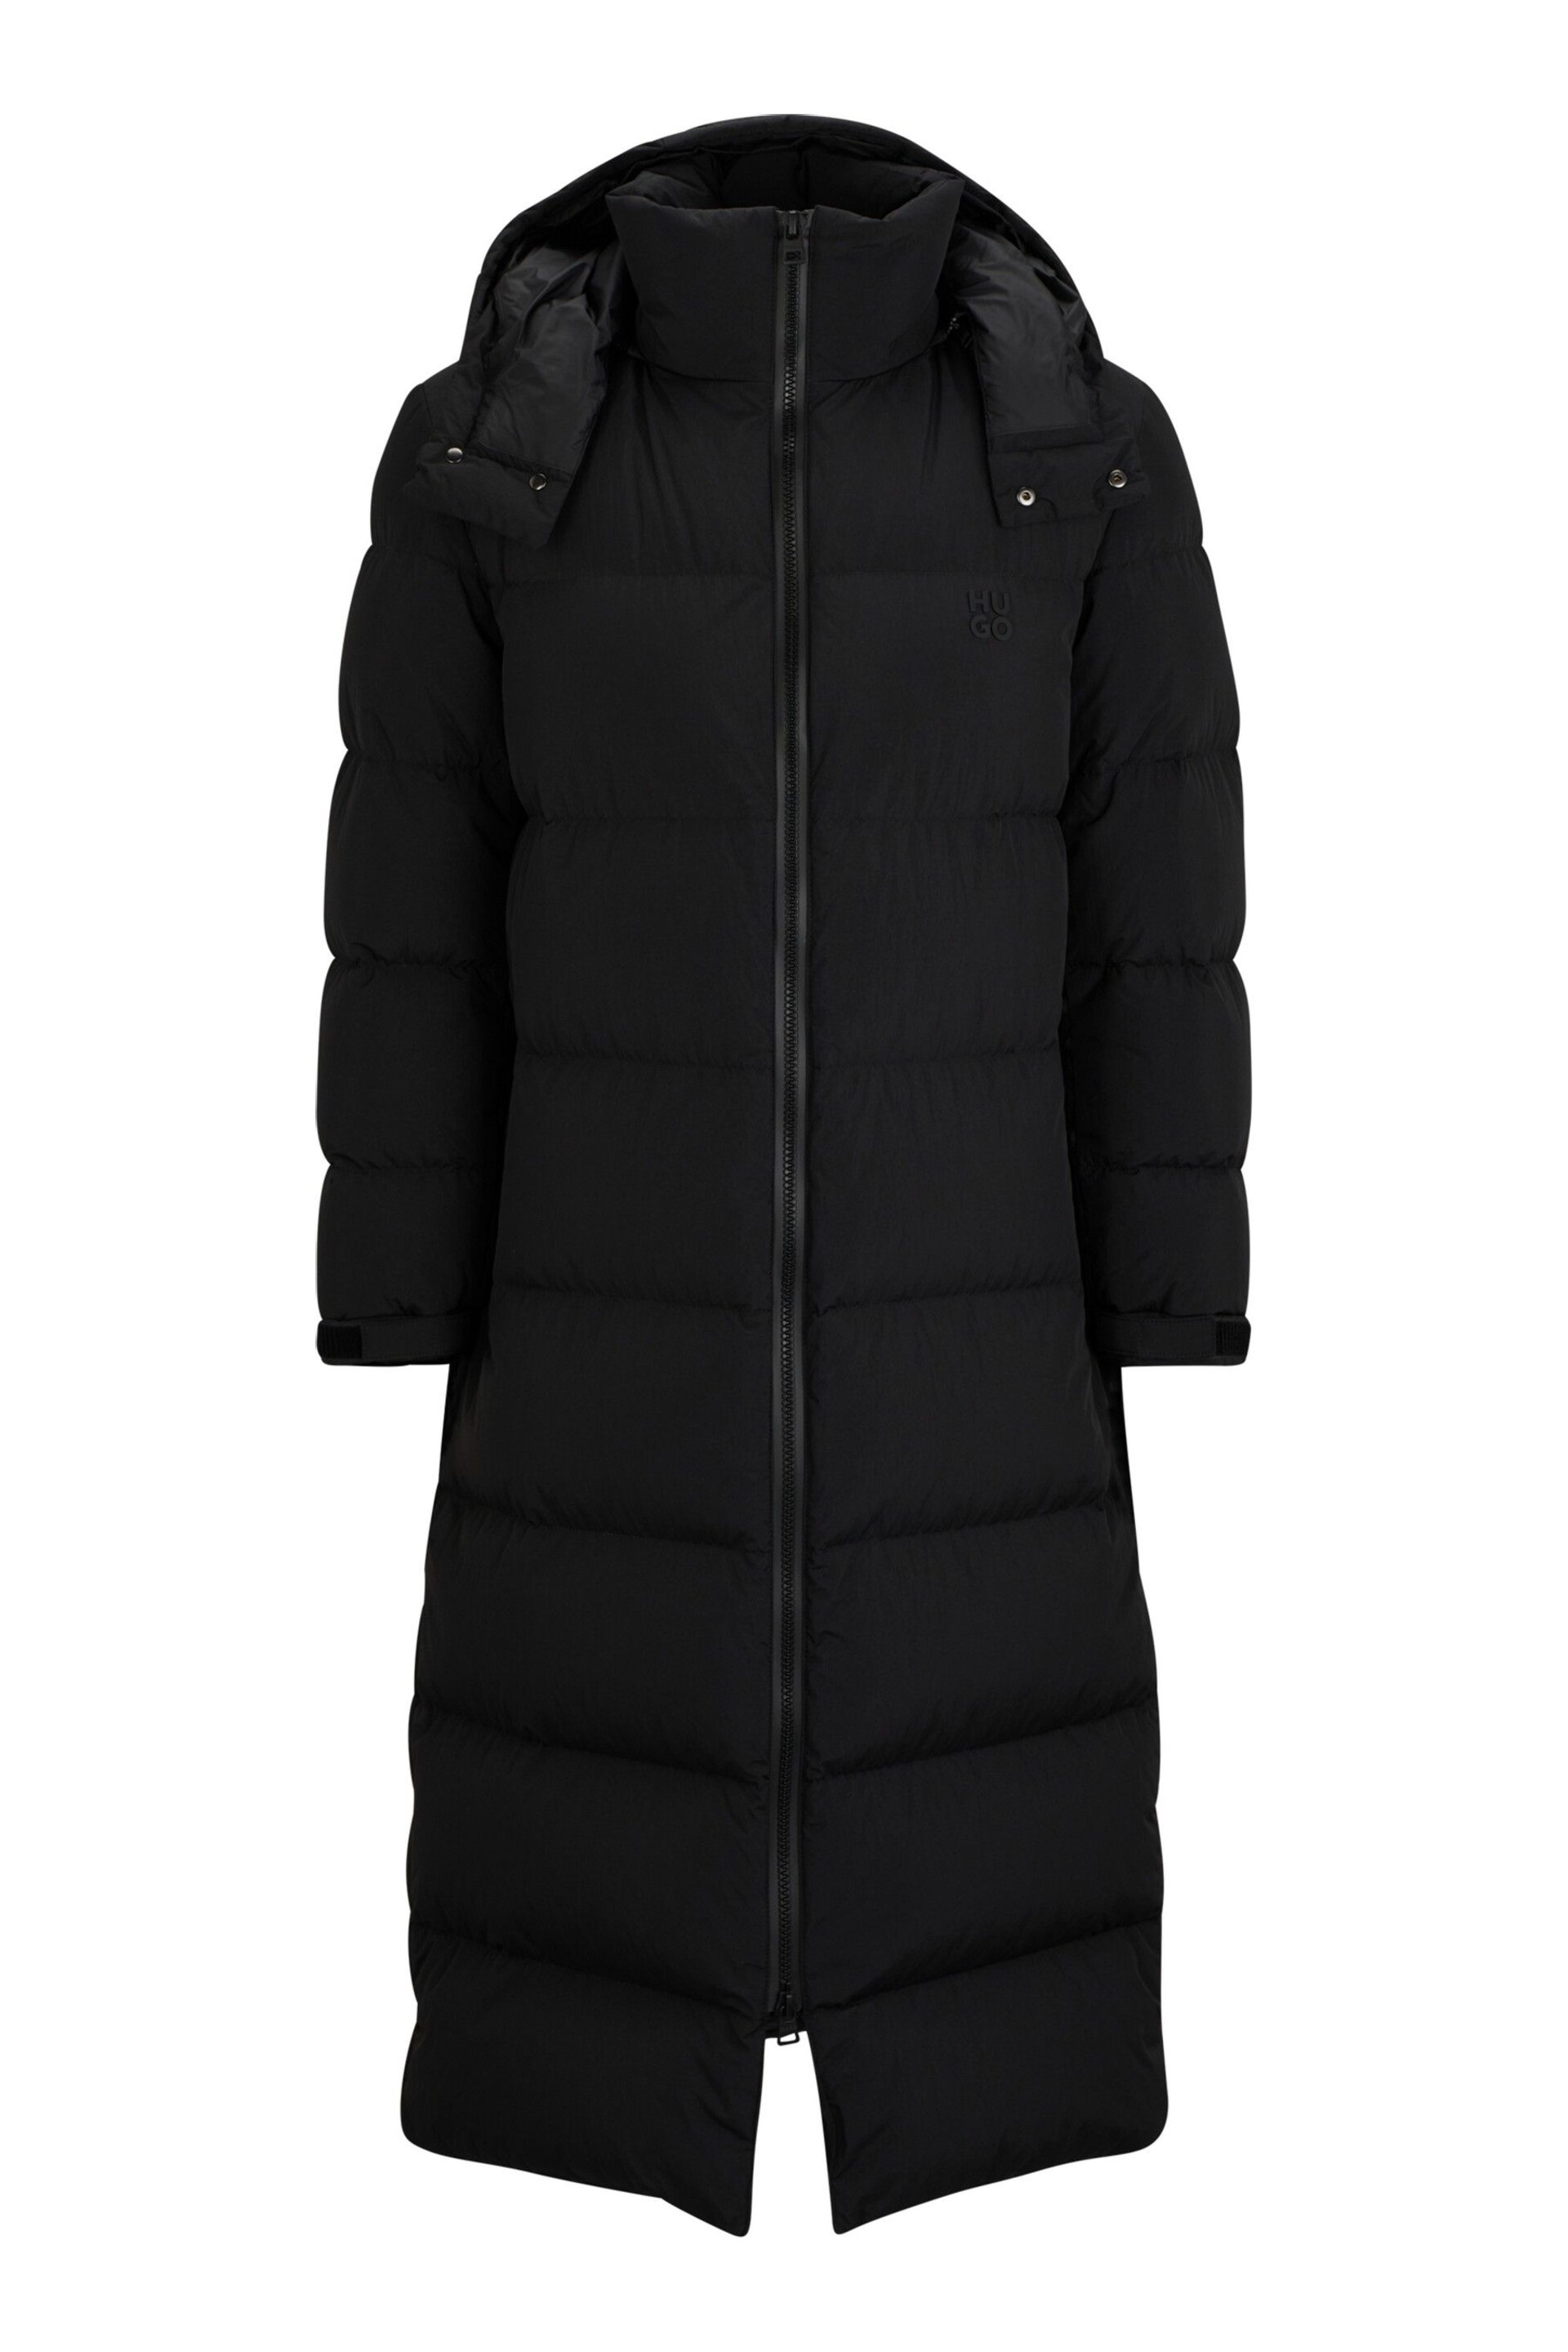 HUGO Mikky Long Down Puffer Jacket - Image 7 of 7